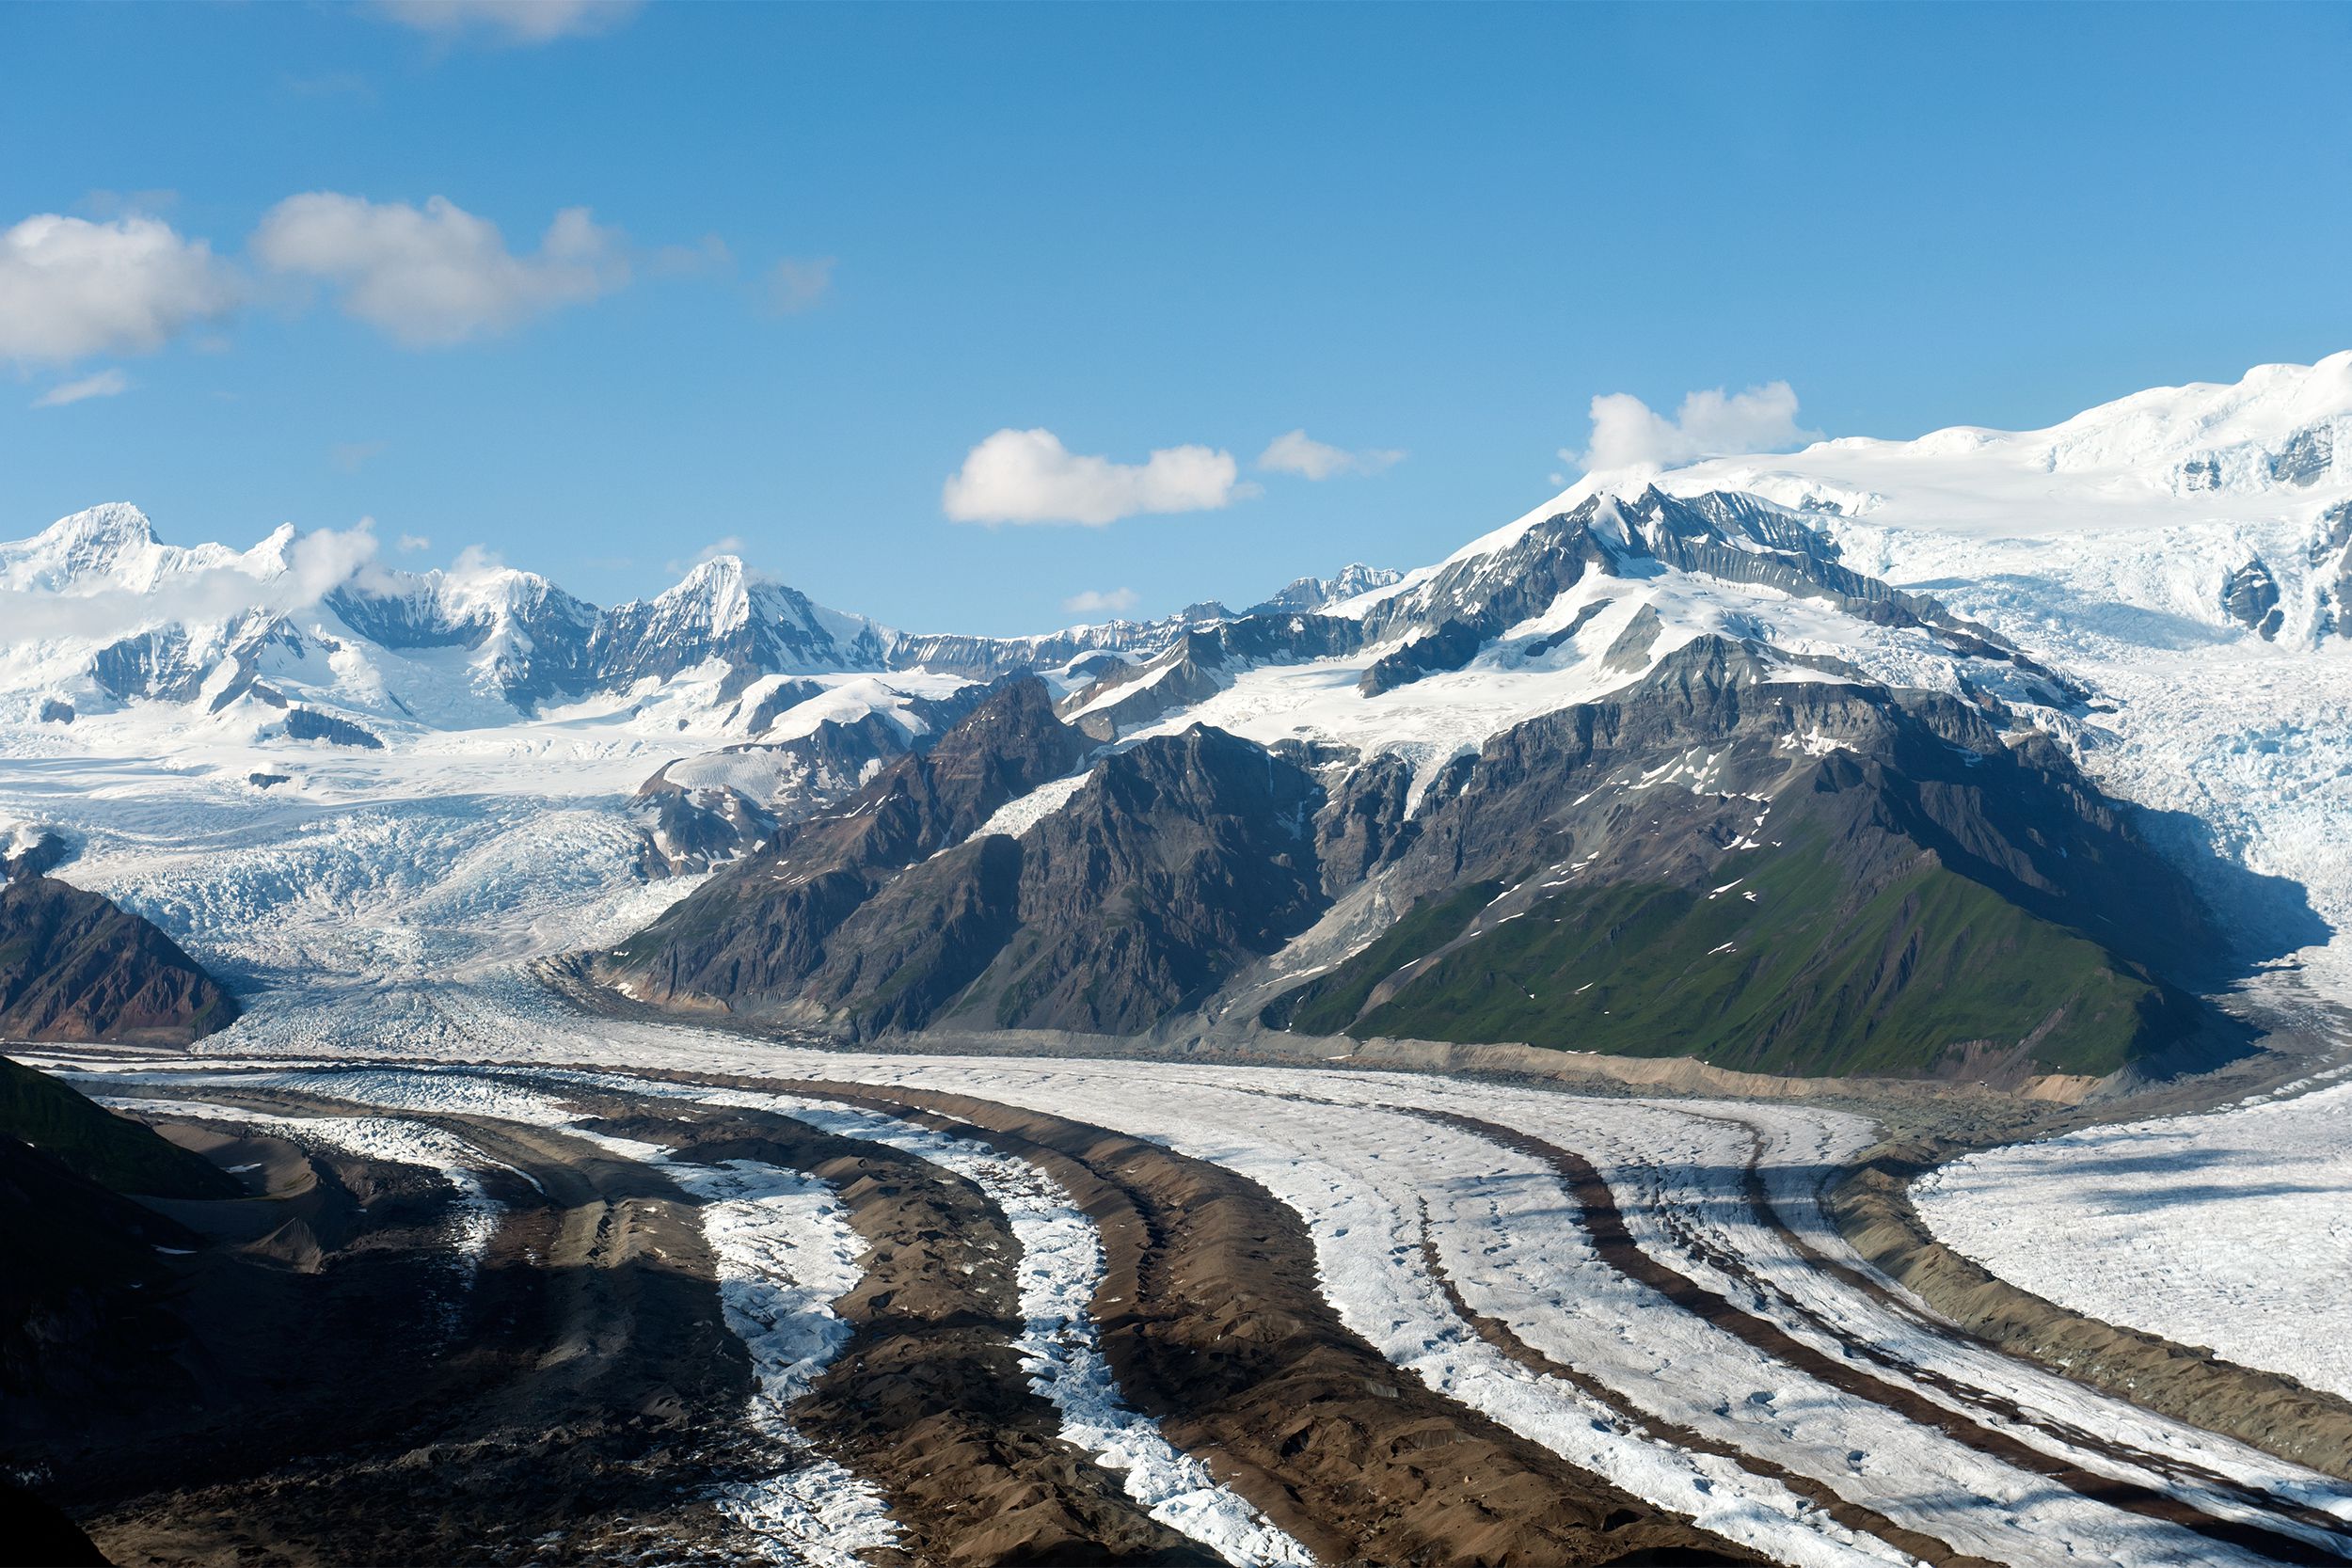 <p>Known as America's largest national park, <a href="https://www.nps.gov/wrst/index.htm">Wrangell – St. Elias National Park</a> boasts a whopping 13.2 million acres. This park is the same size as Yellowstone National Park, Yosemite National Park, and Switzerland combined. </p>